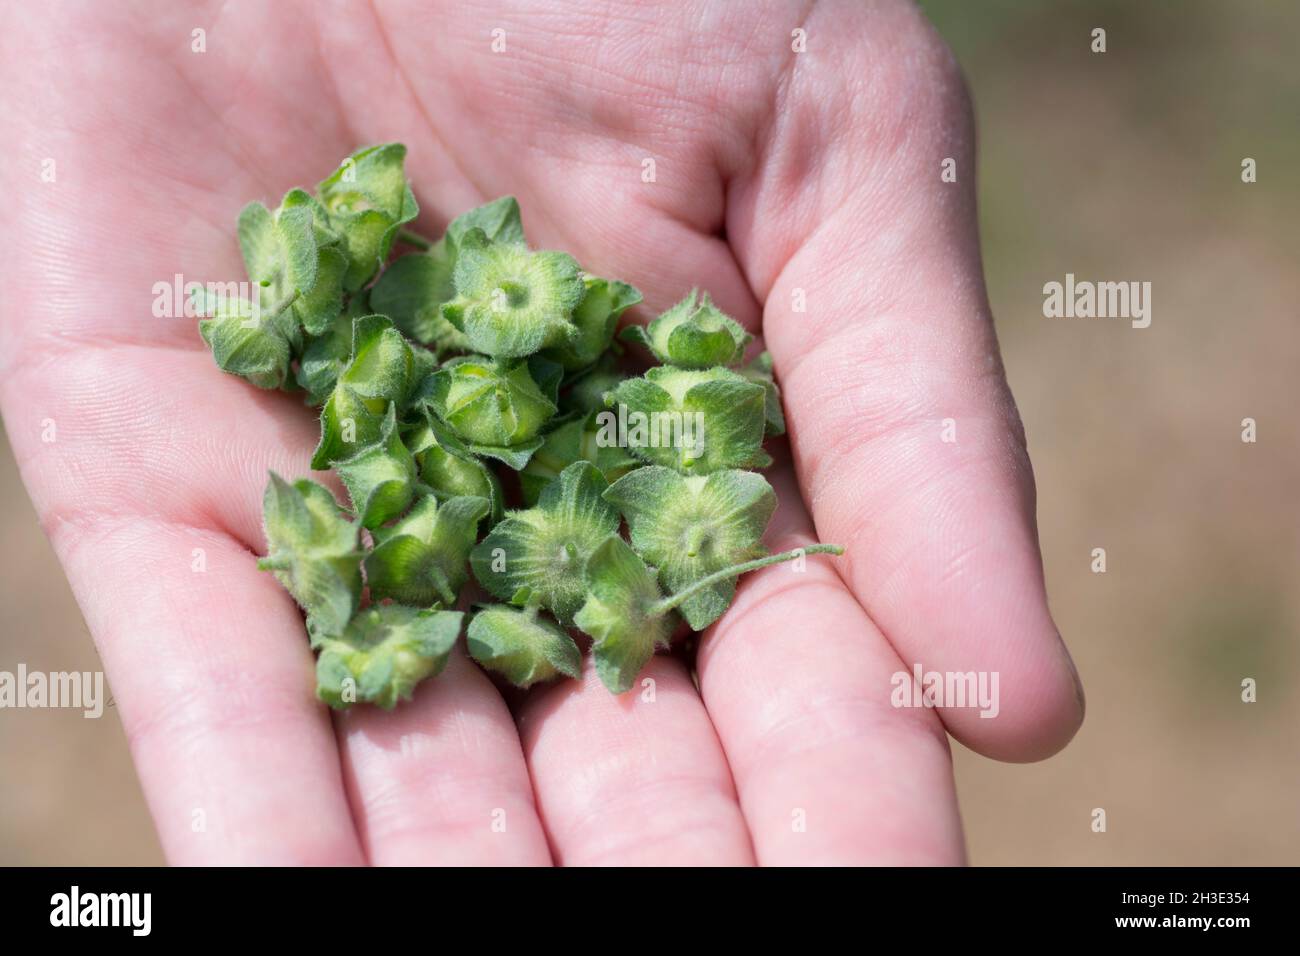 Hand full of Malva nicaeensis fruits, a species of flowering plant in the mallow family known by the common names bull mallow and French mallow Stock Photo